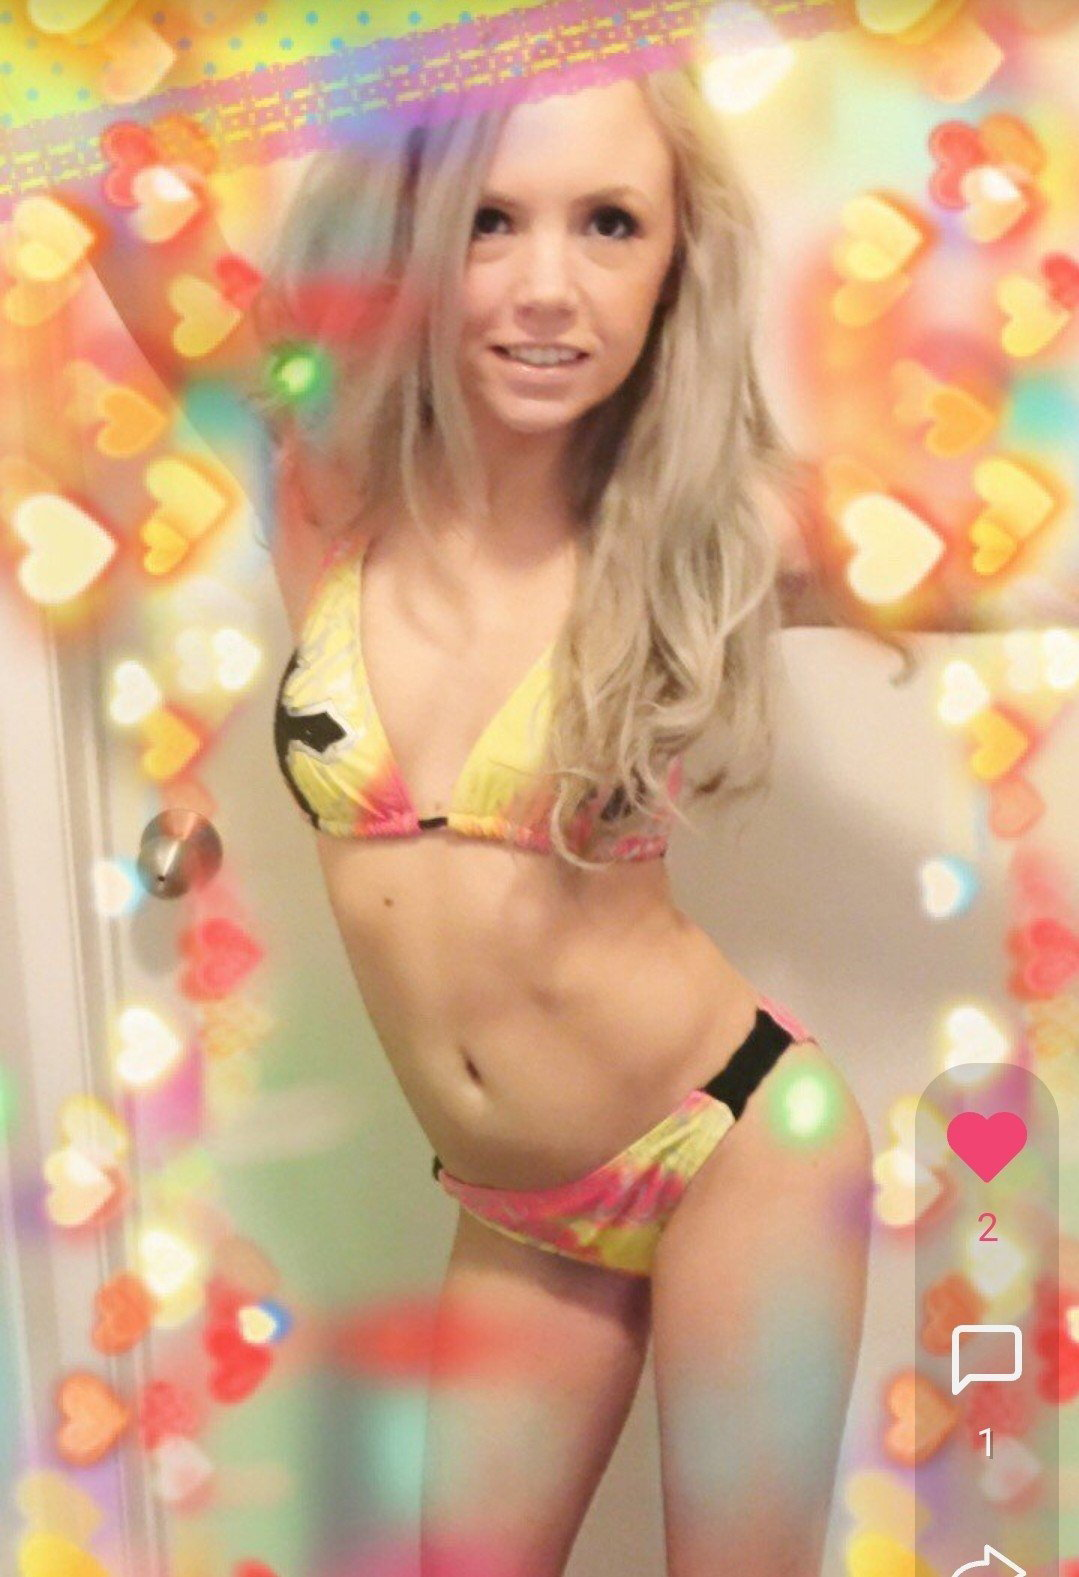 Watch the Photo by CamSharks & CSLive with the username @CamSharks, who is a brand user, posted on November 5, 2022. The post is about the topic XXX Webcam Shows. and the text says '@CamSharks Scorching HOT Star Model @SophiaSinclaireX is LIVE RIGHT NOW!

https://CamSharks.net/cam/SophiaSinclaireX (18+)

✓Free Signup • Cam2Cam✓

#webcam #livesex #liveporn #horny #sex #sexy #women #porn #sex #xxx #sexcam #naked #tits #bigtoys..'